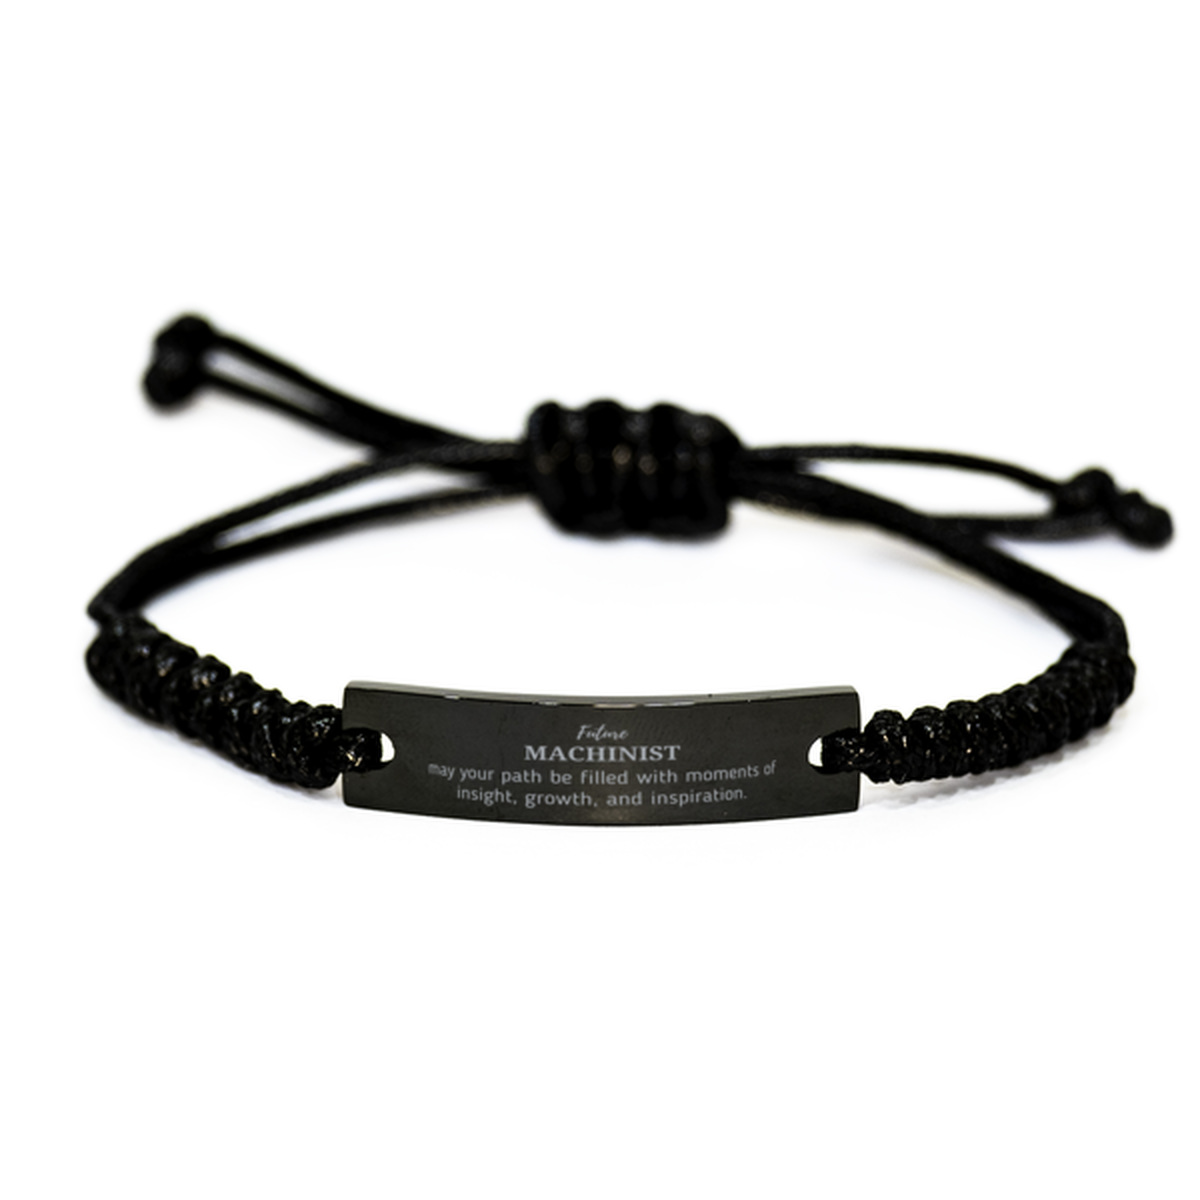 Future Machinist Gifts, May your path be filled with moments of insight, Graduation Gifts for New Machinist, Christmas Unique Black Rope Bracelet For Men, Women, Friends